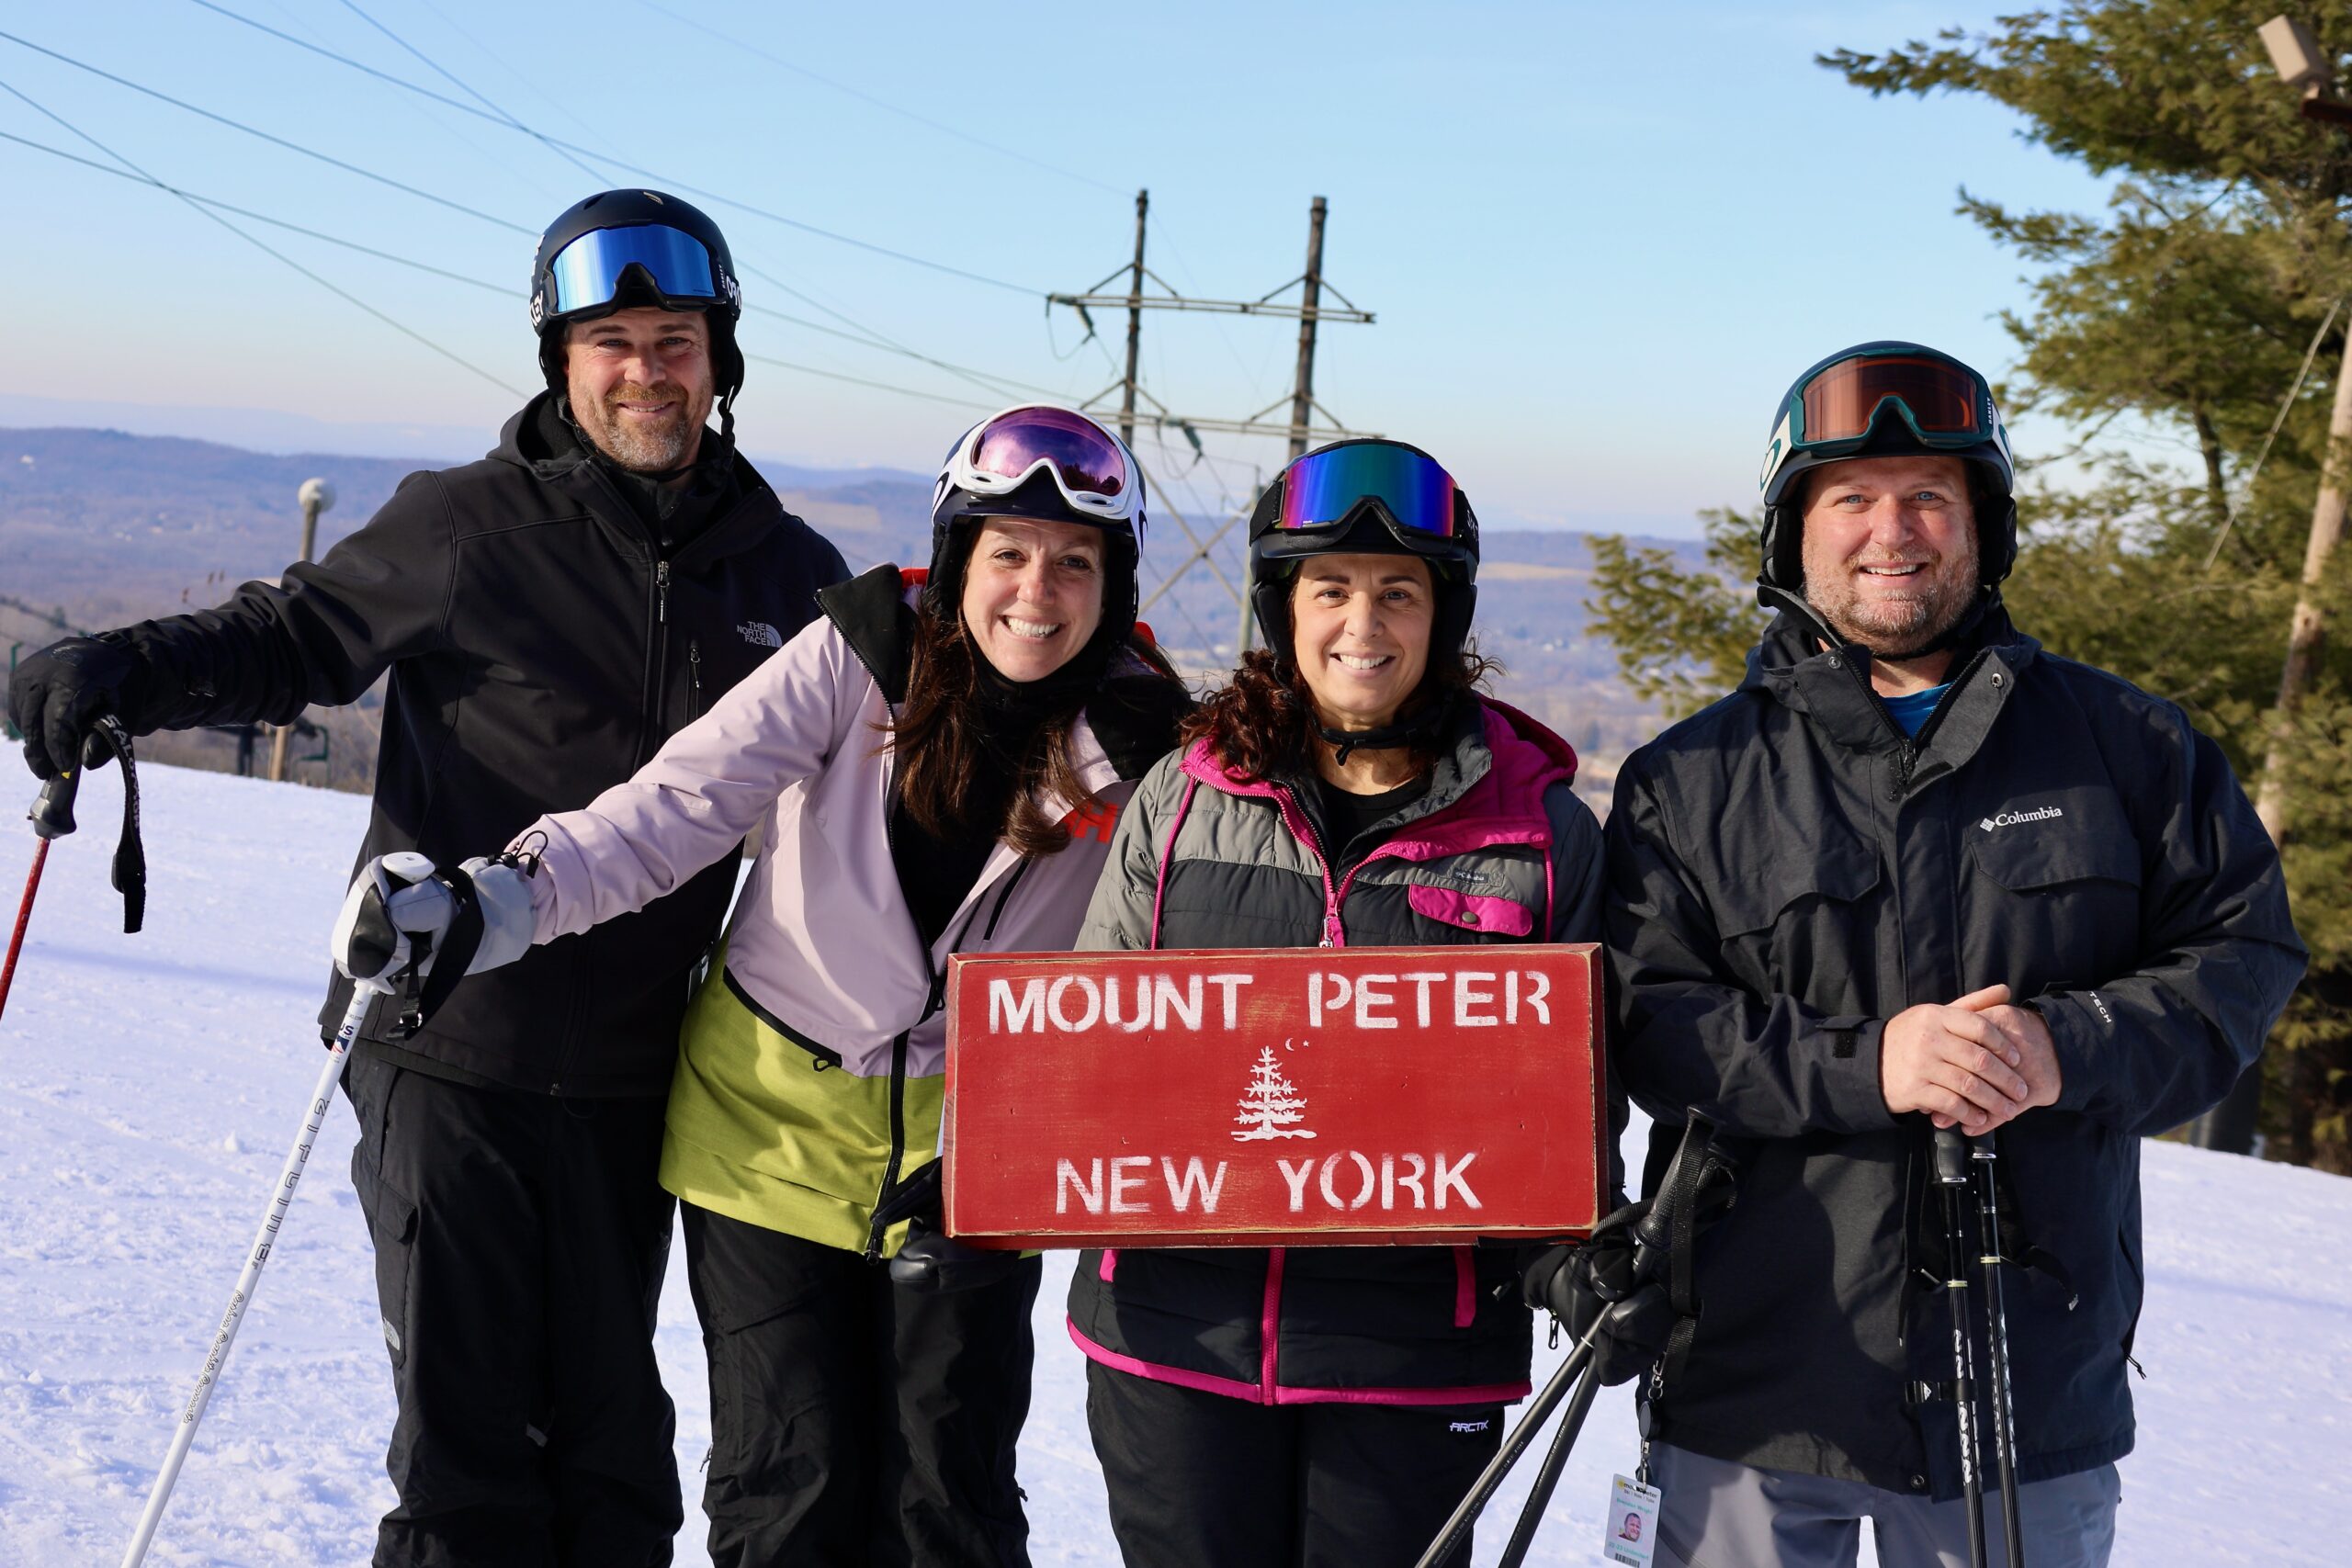 Family fun at mount peter when you get season passes for the family